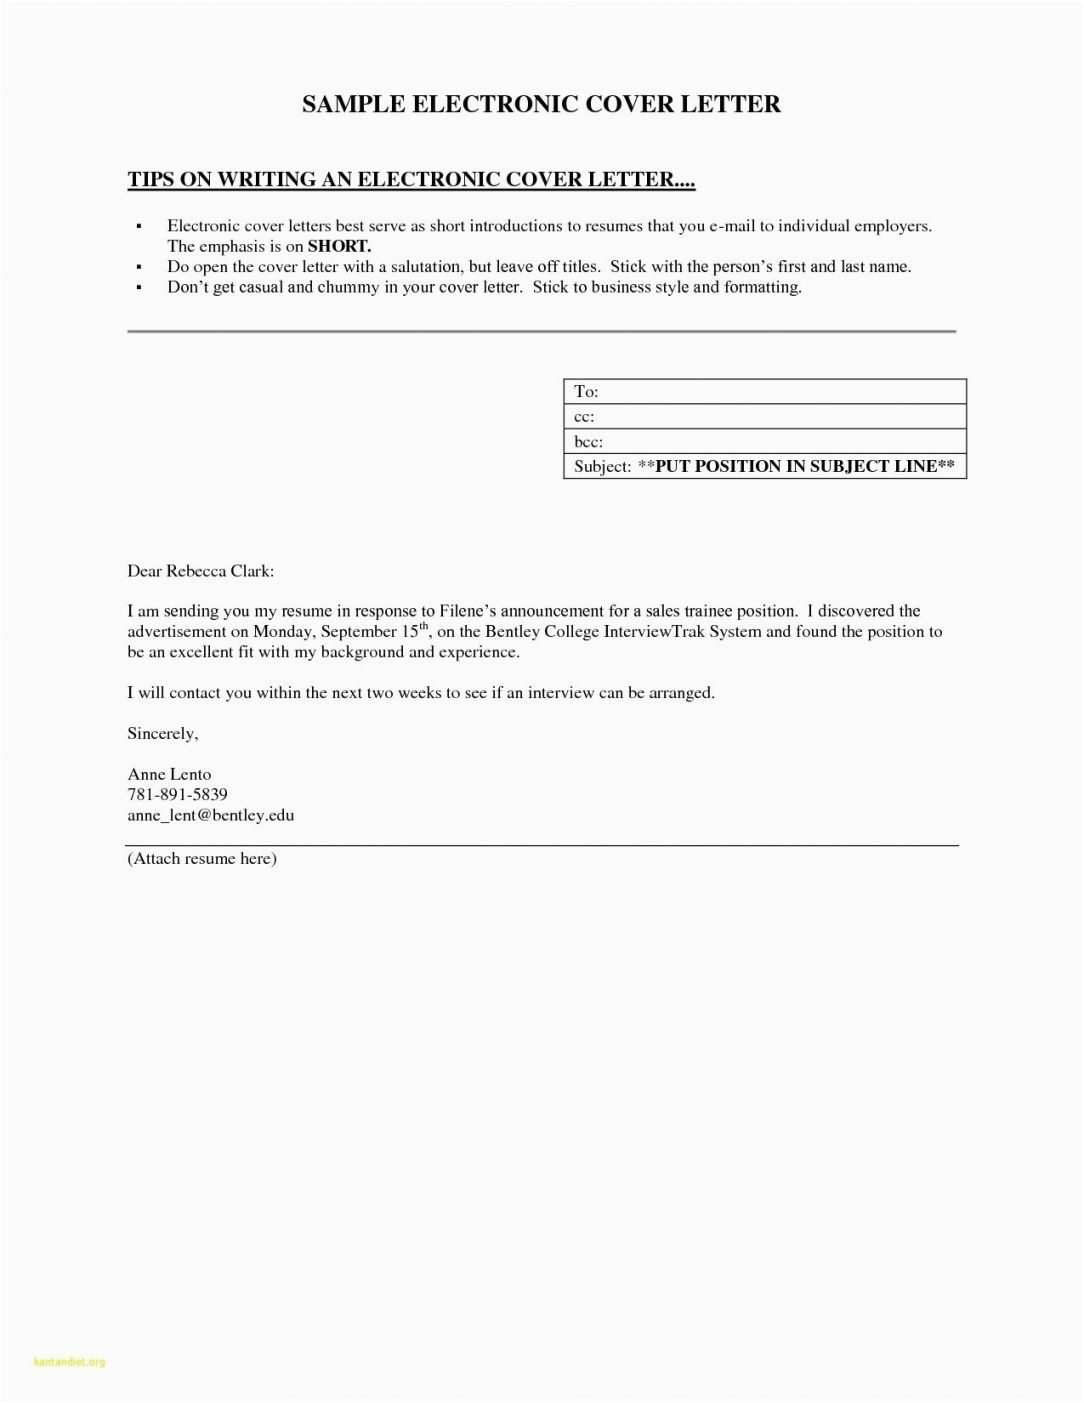 Sample Email Letter with Resume attached Sample Email Cover Letter with Resume attached